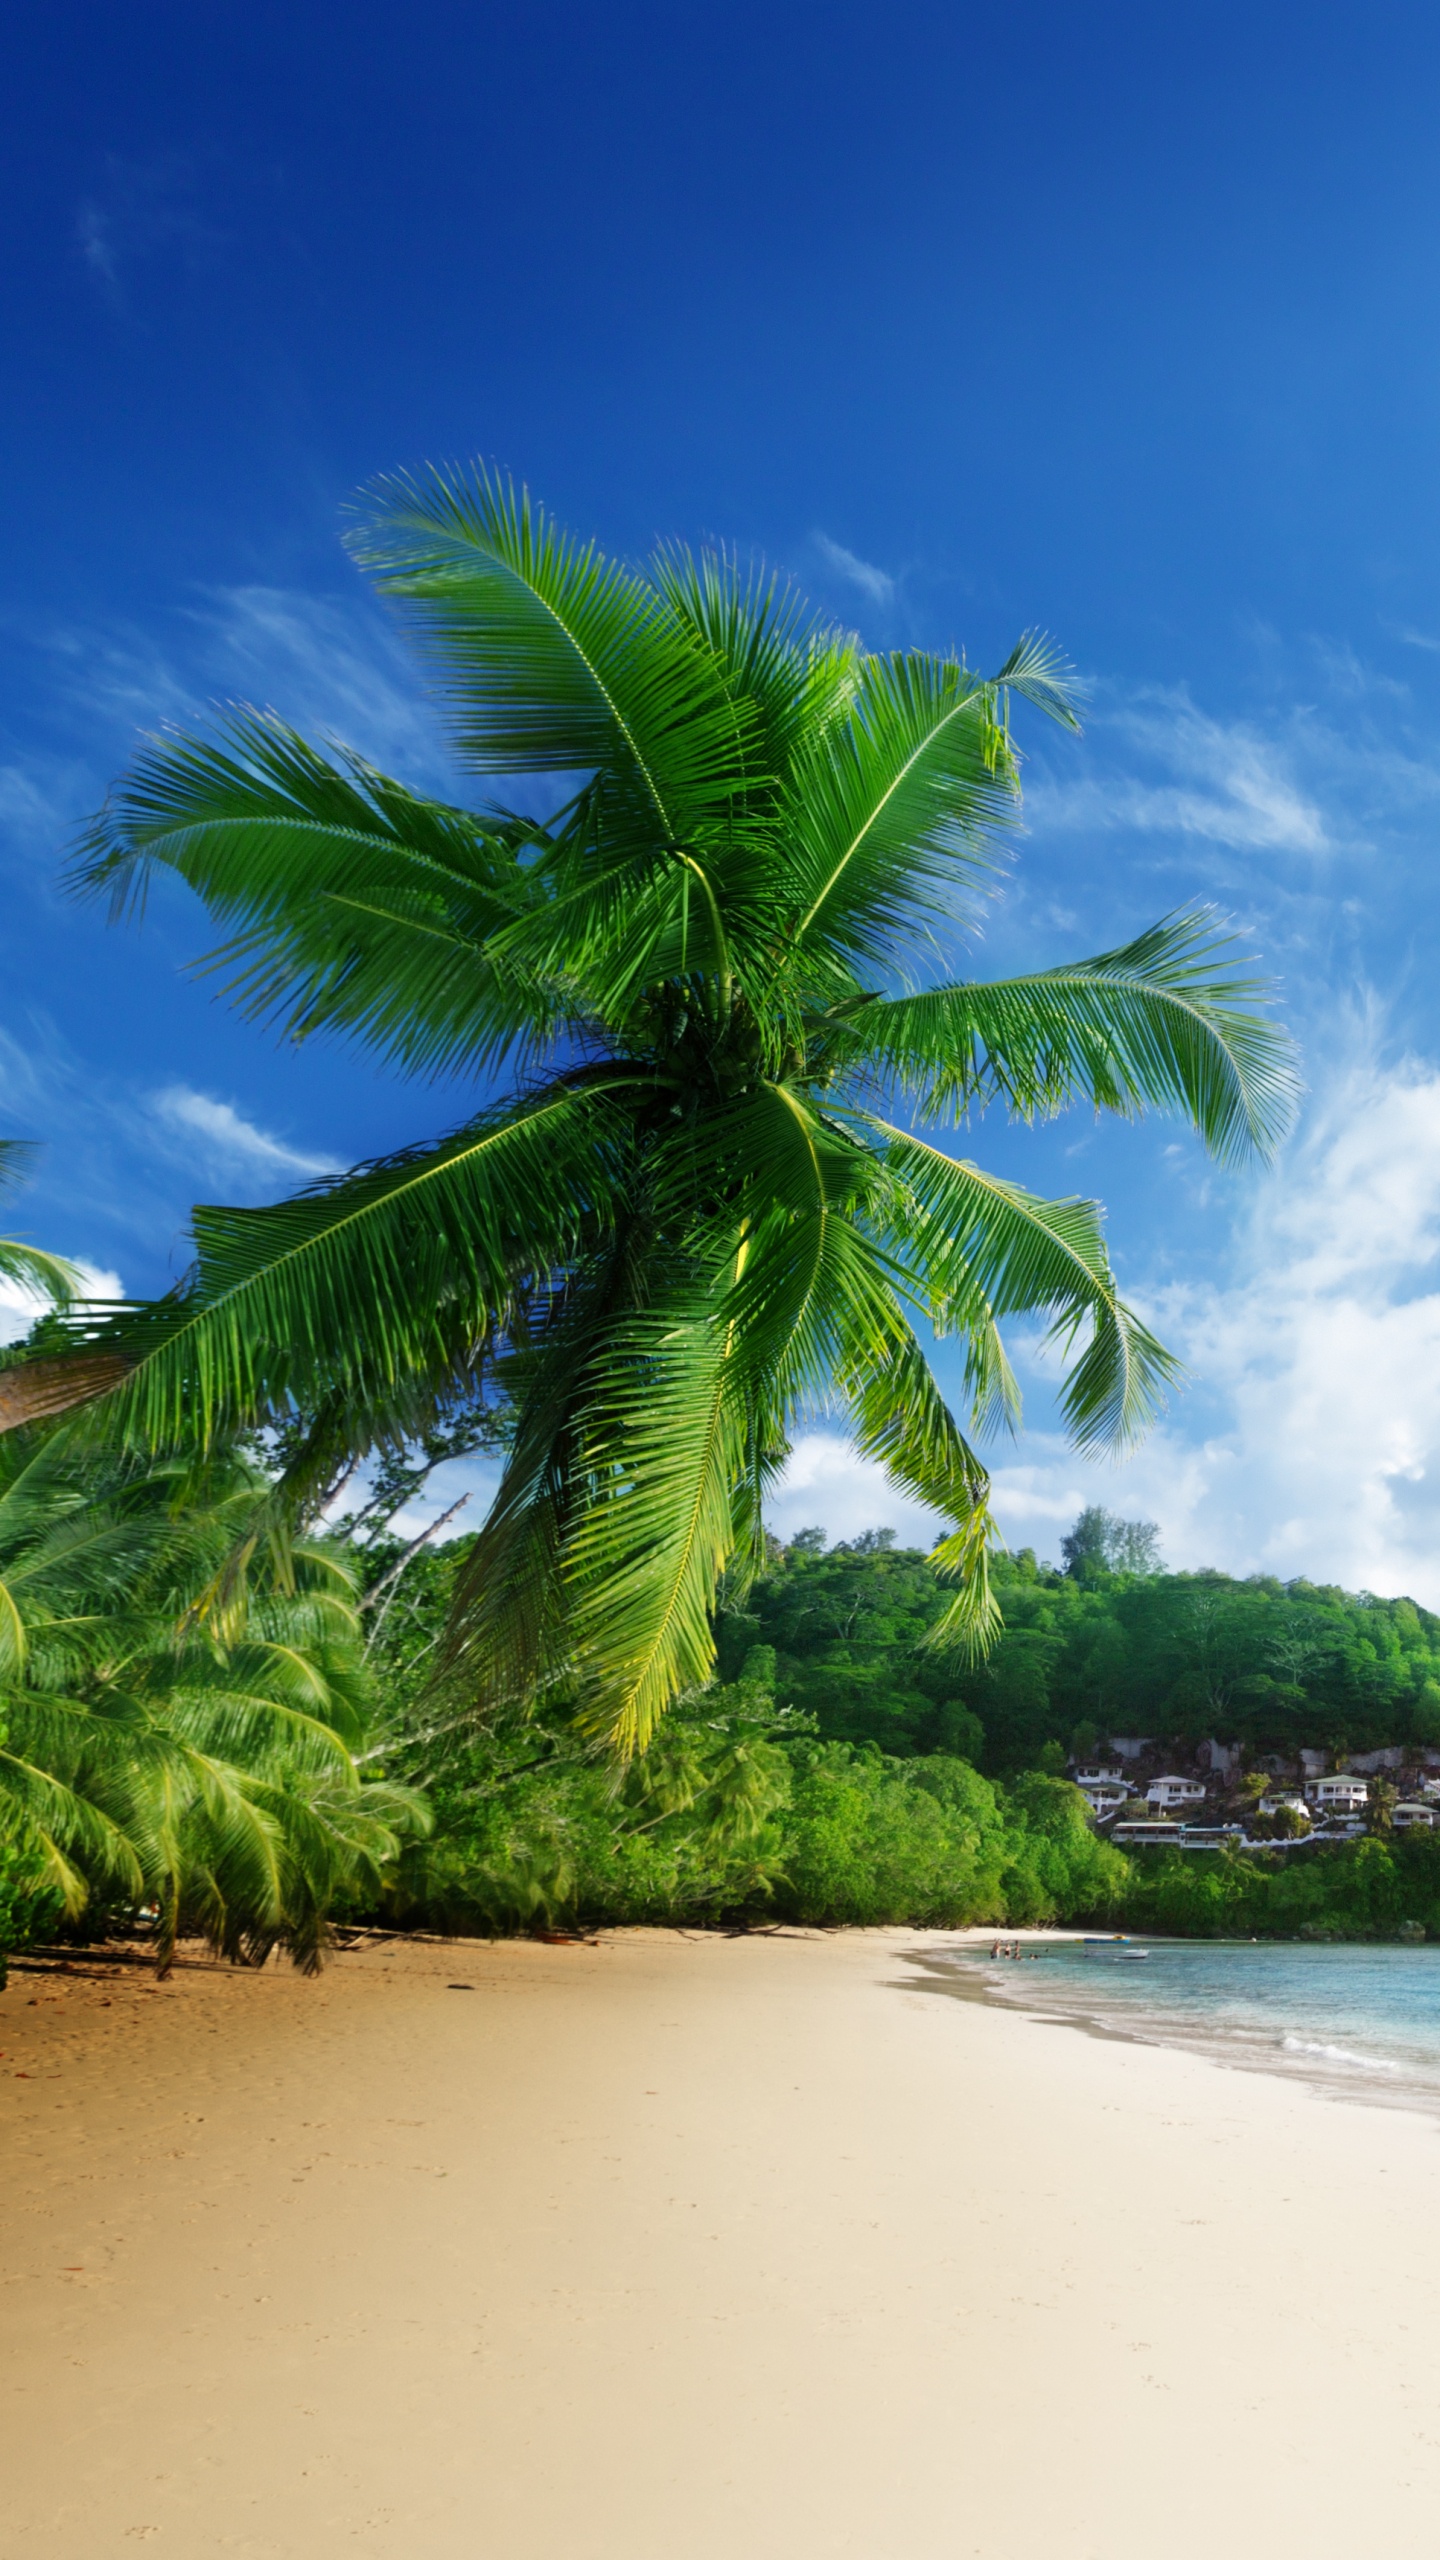 Green Palm Tree on White Sand Beach During Daytime. Wallpaper in 1440x2560 Resolution